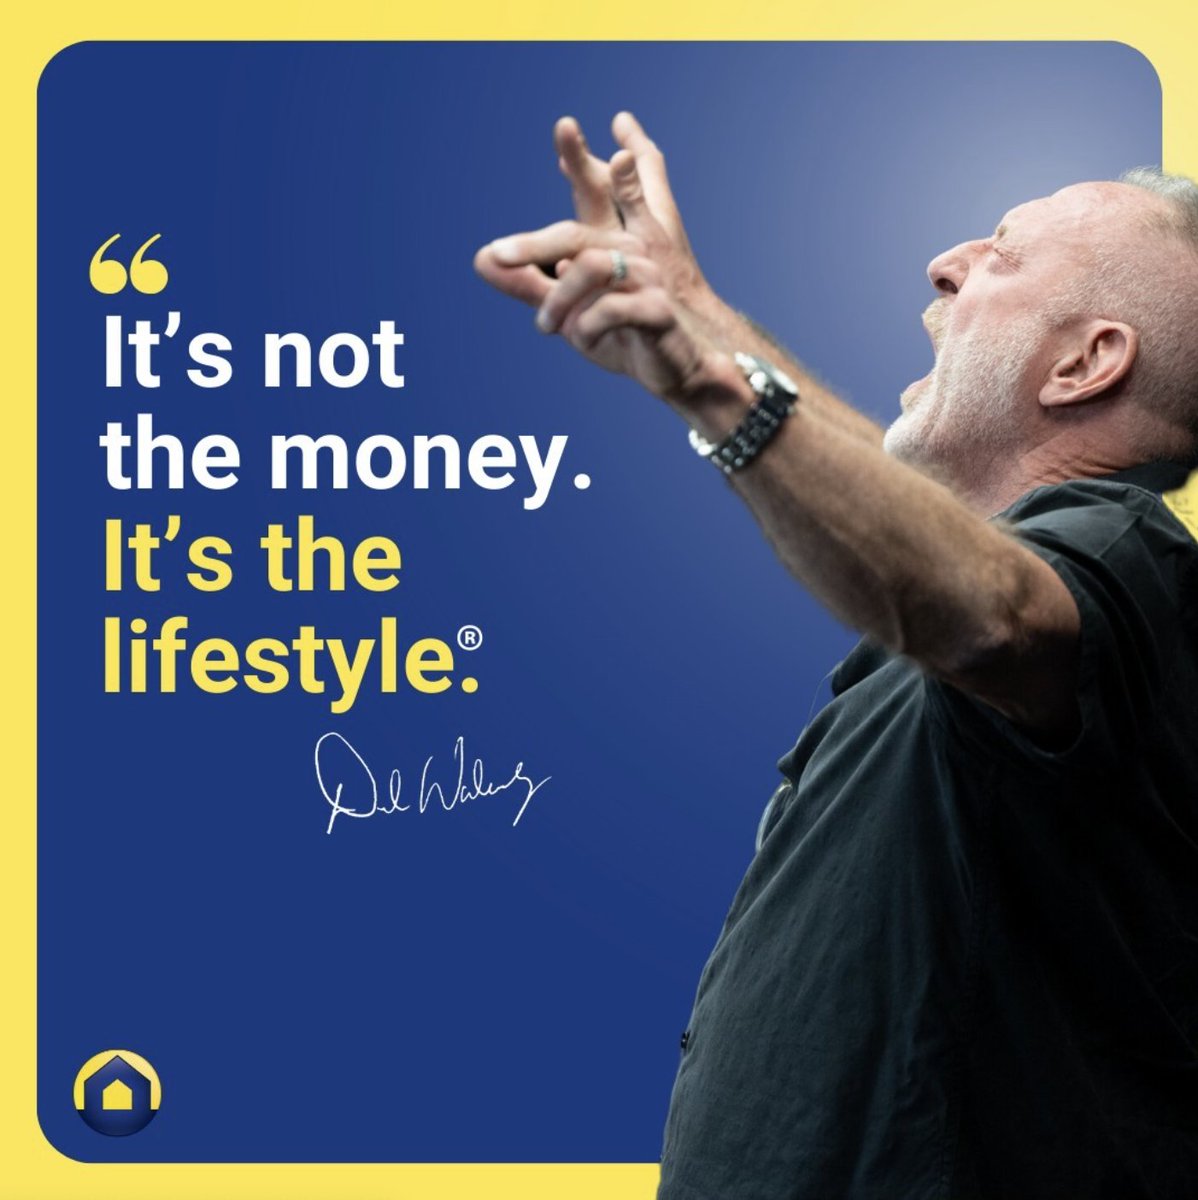 #delquotes #delsays #wealthbuilding #investingsuccess #lifestylesunlimited #realestateinvesting #retire #passiveincome #buildwealth #FinancialFreedom